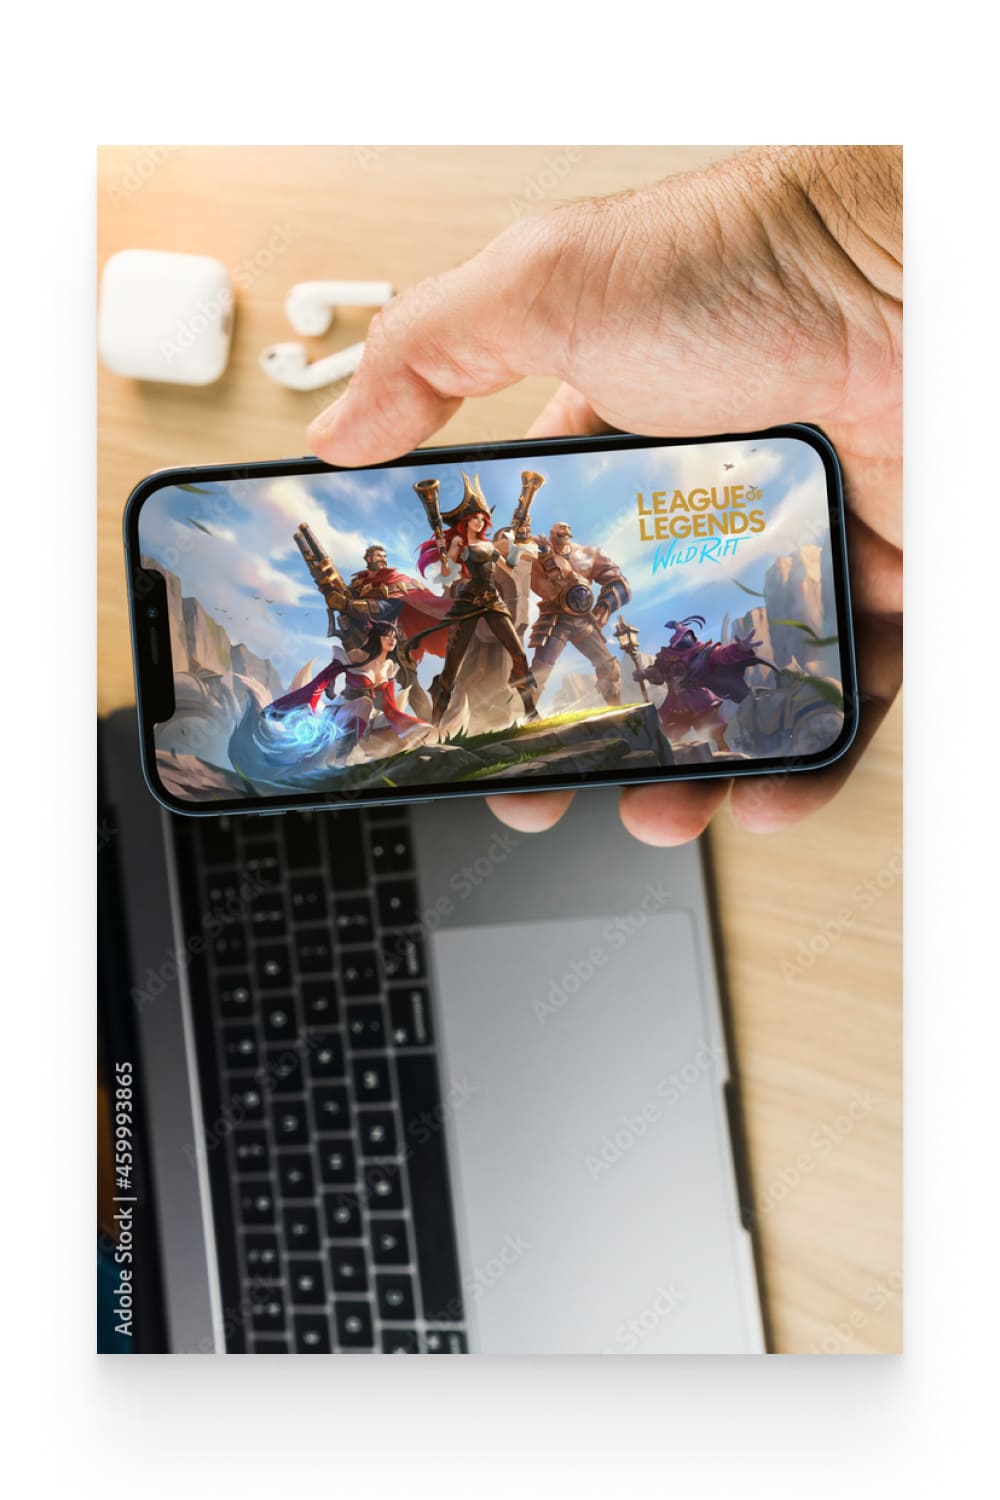 Male hand holding a smartphone with League of Legends mobile game app on the screen.